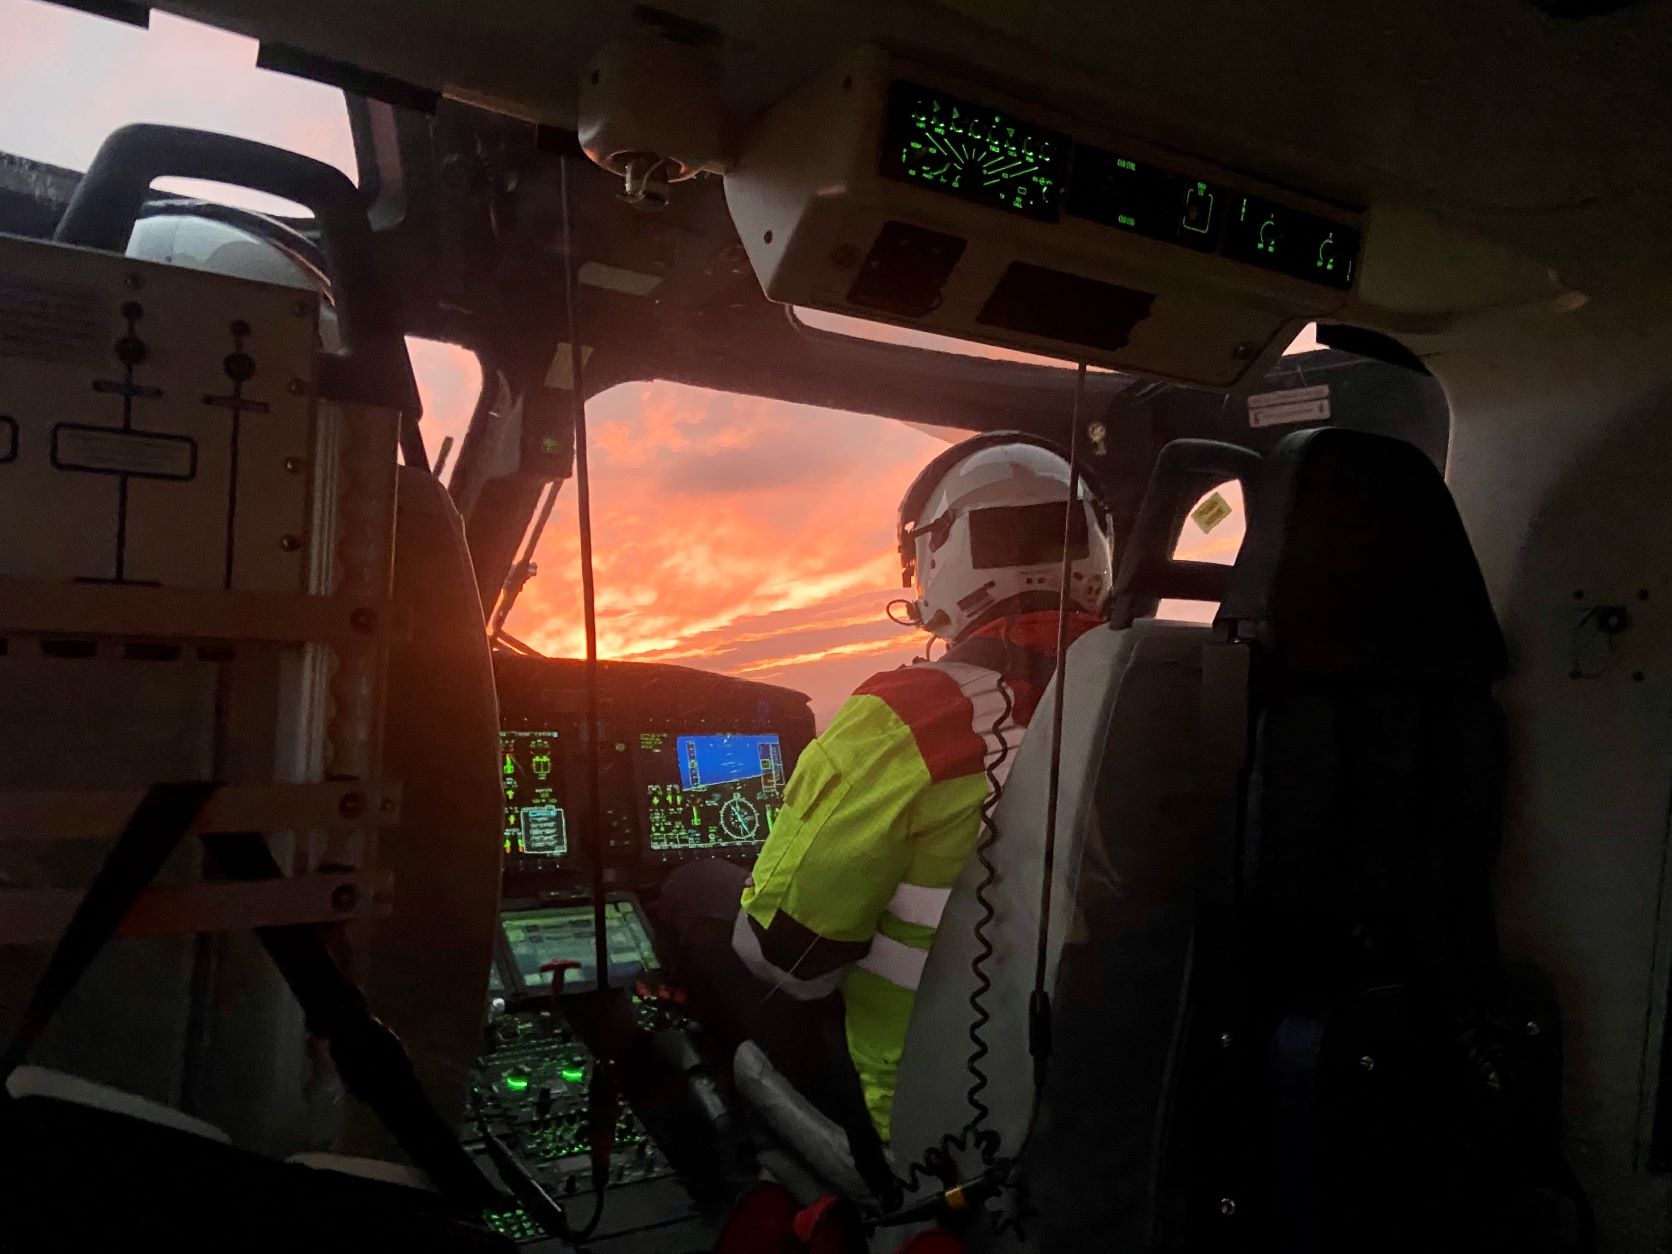 Cockpit of LNAA helicopter at sunset